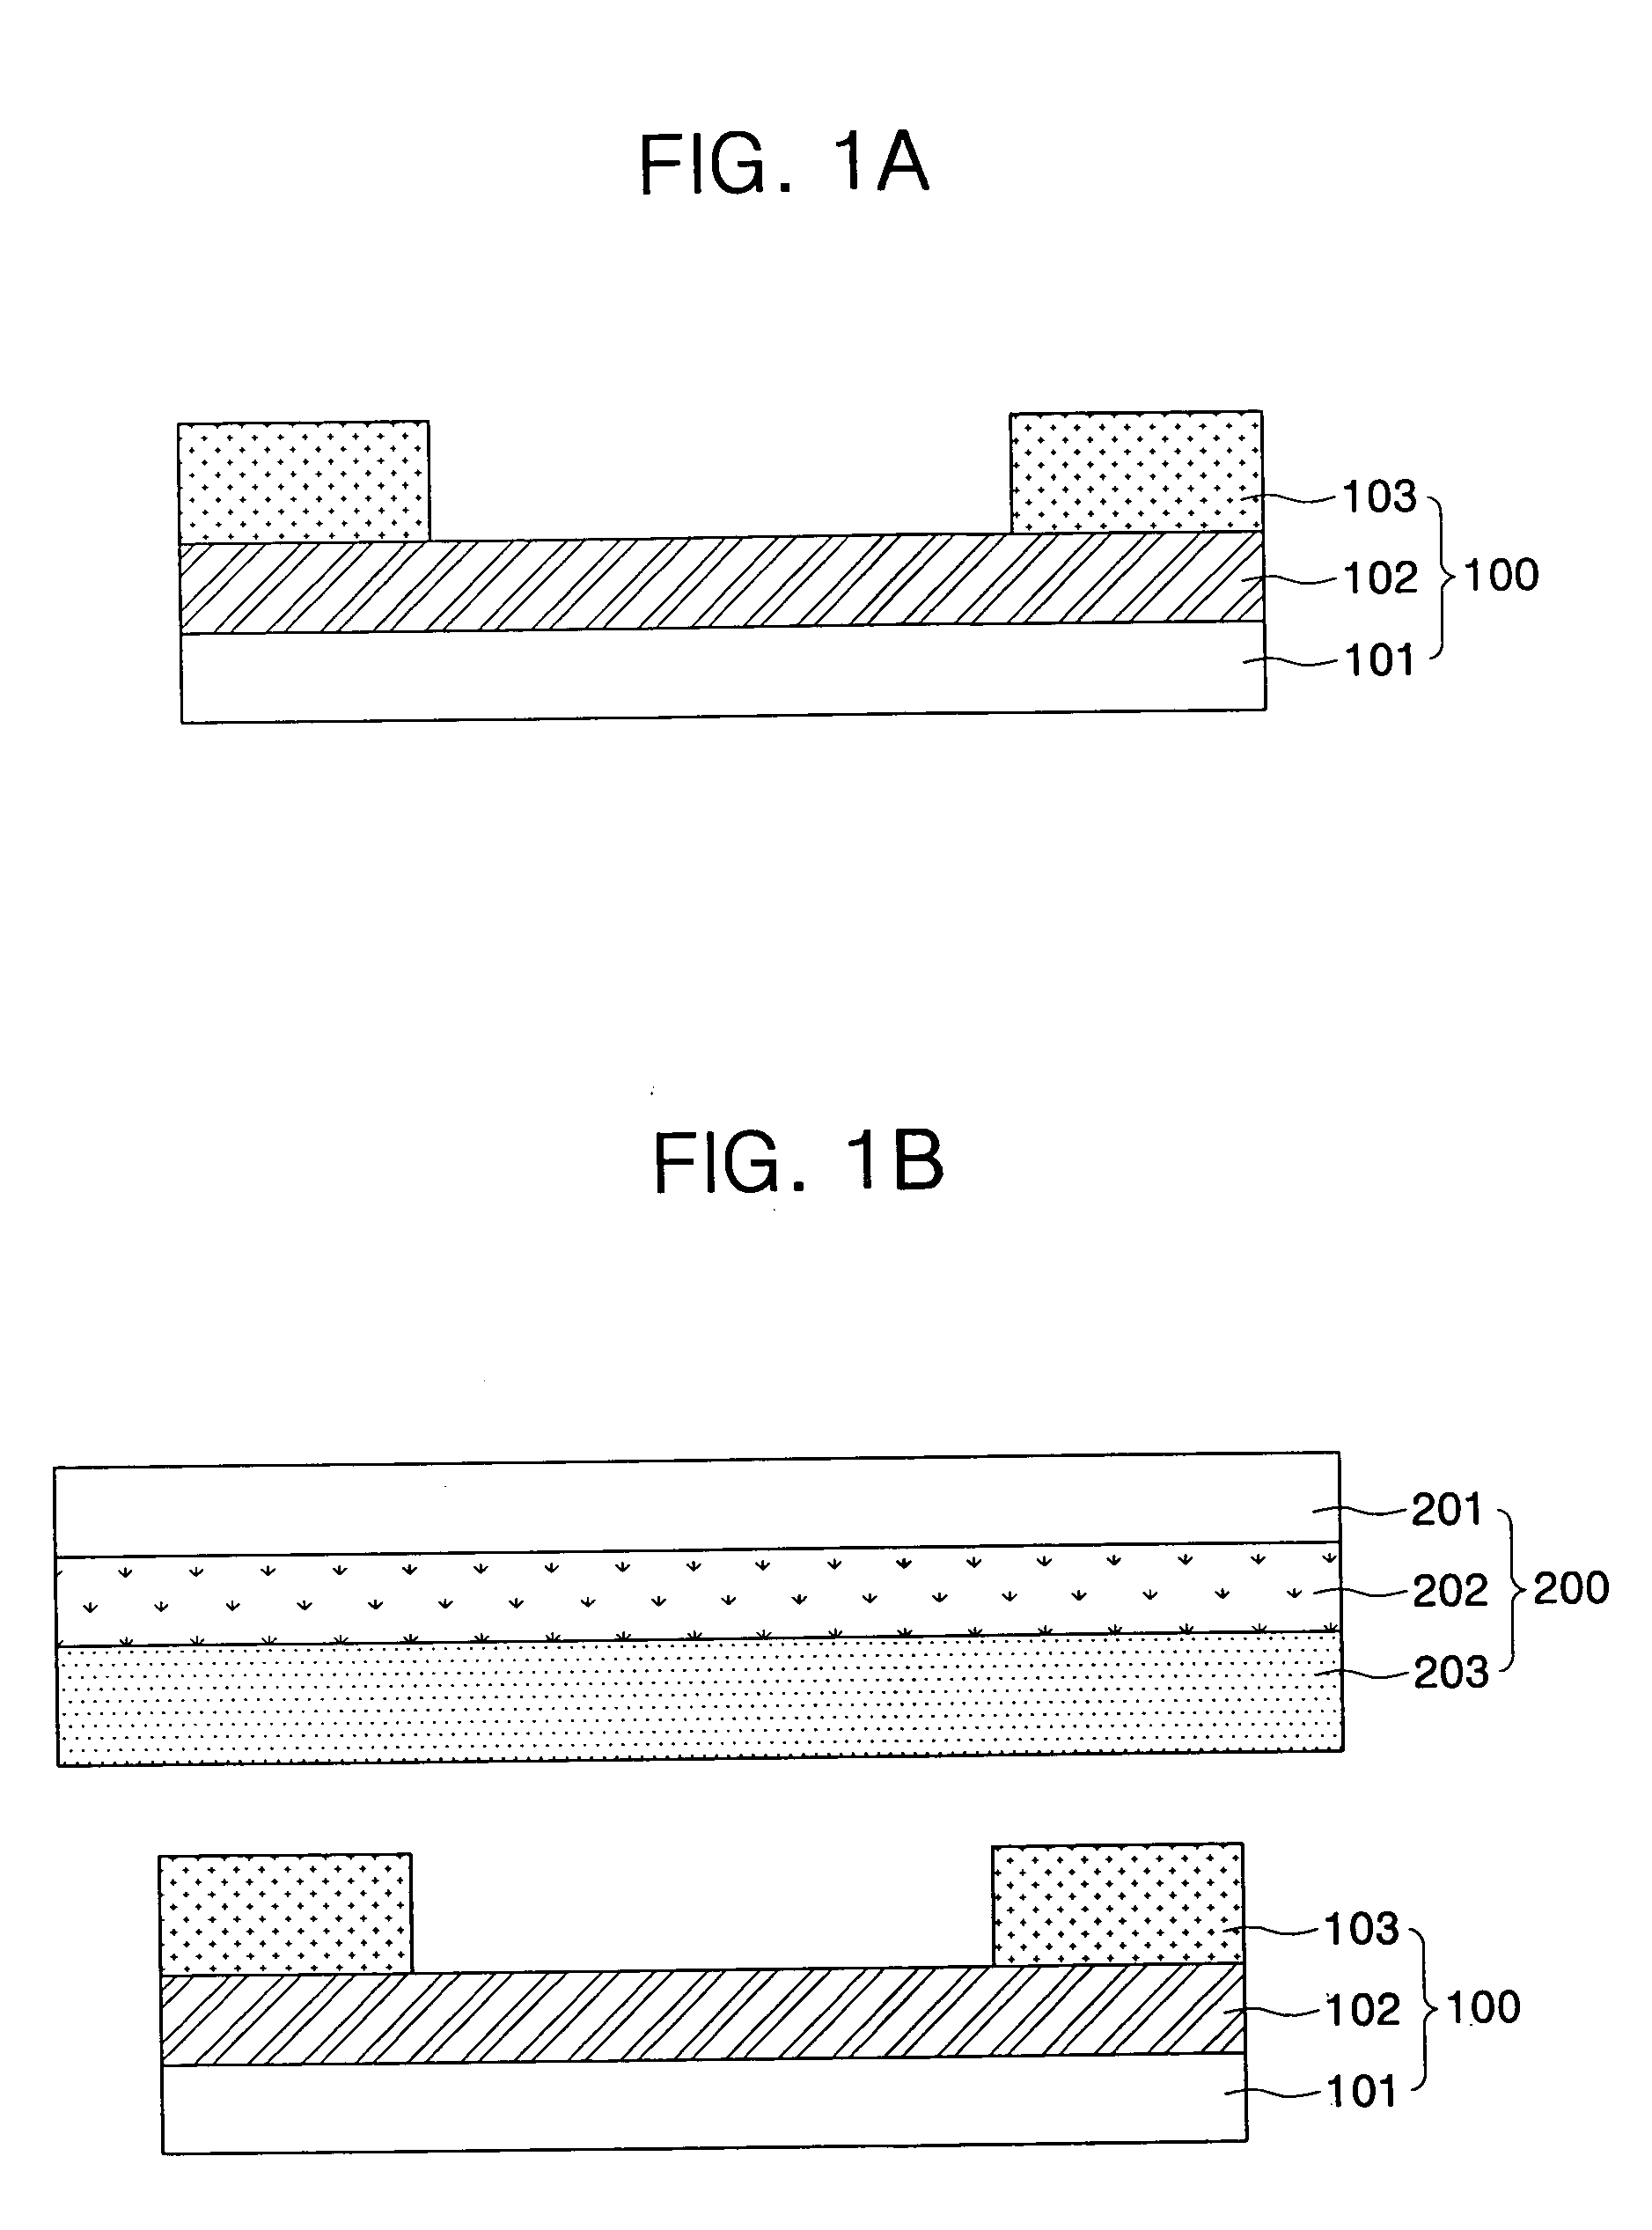 Small molecular organic electroluminescent display device and method of fabricating the same